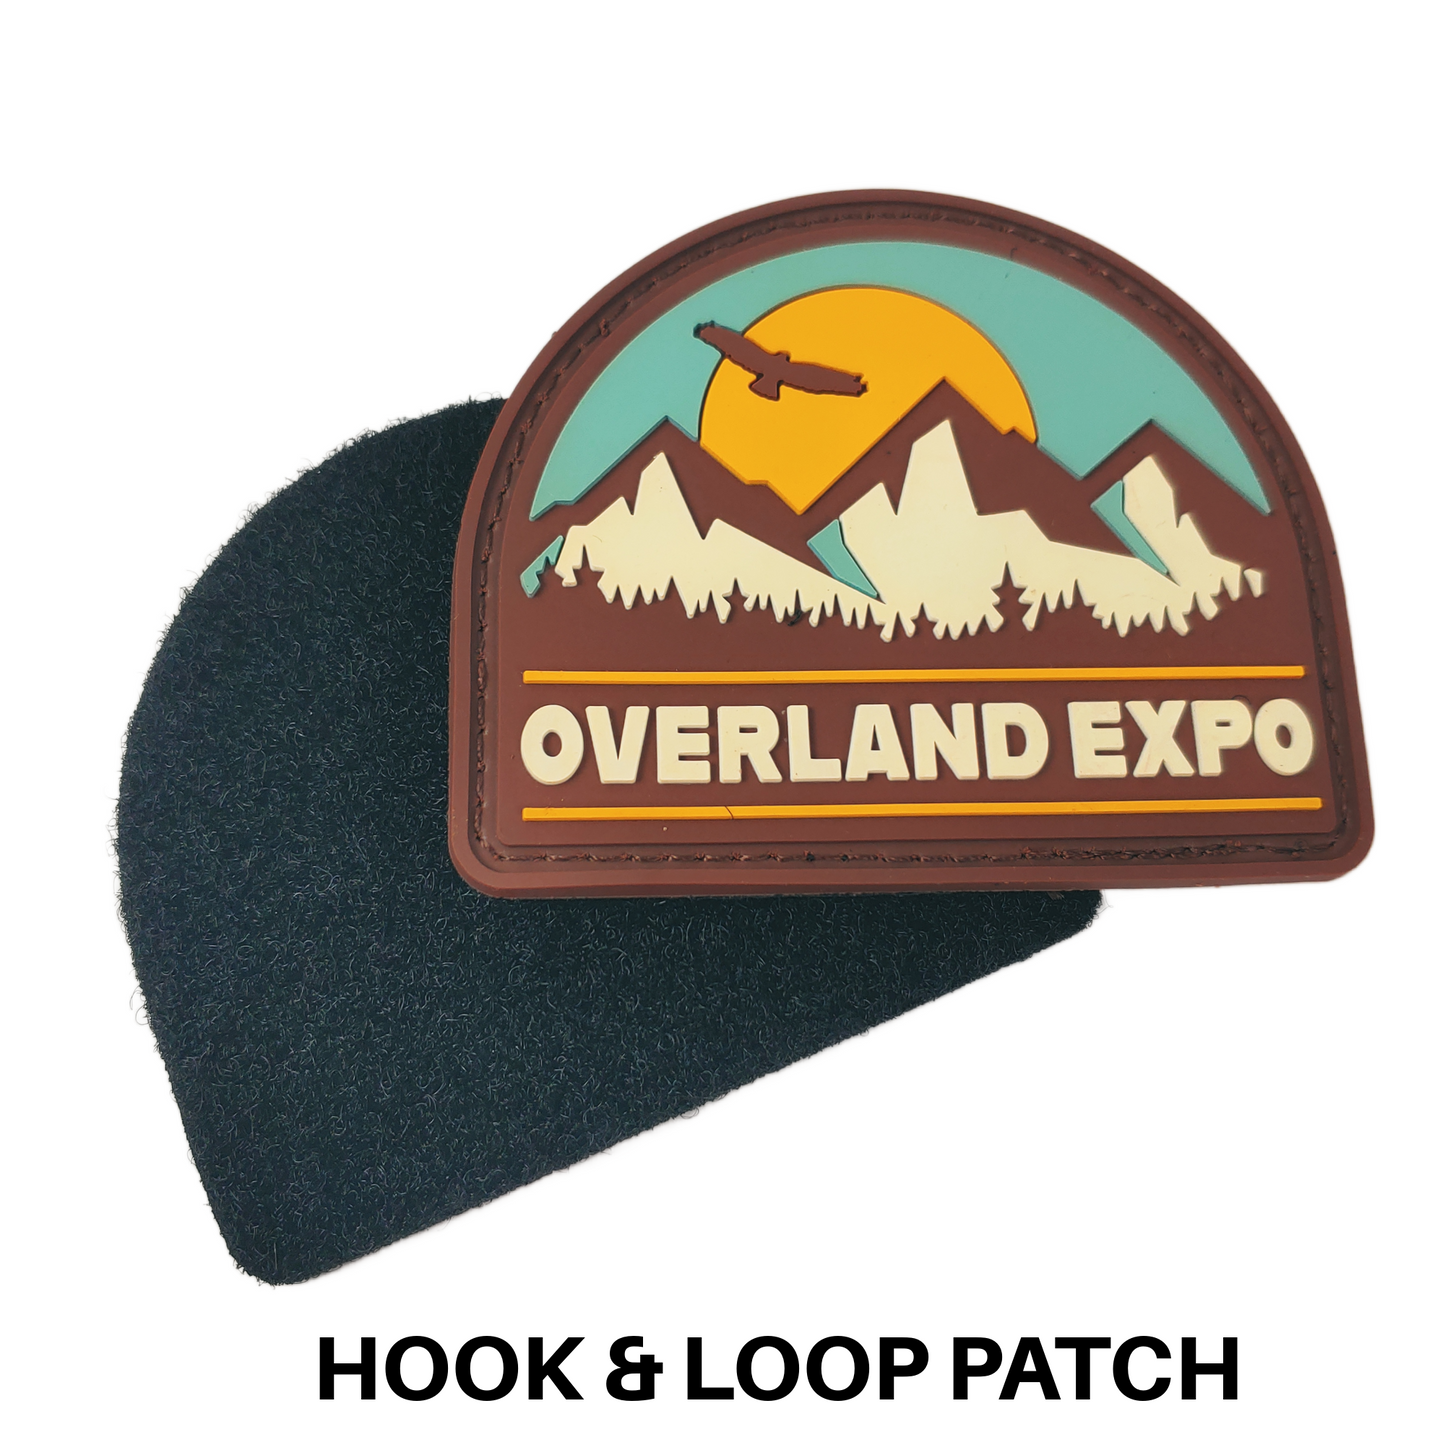 Overland Expo - Rubber Mountain with Bird Patch - Velcro Patch